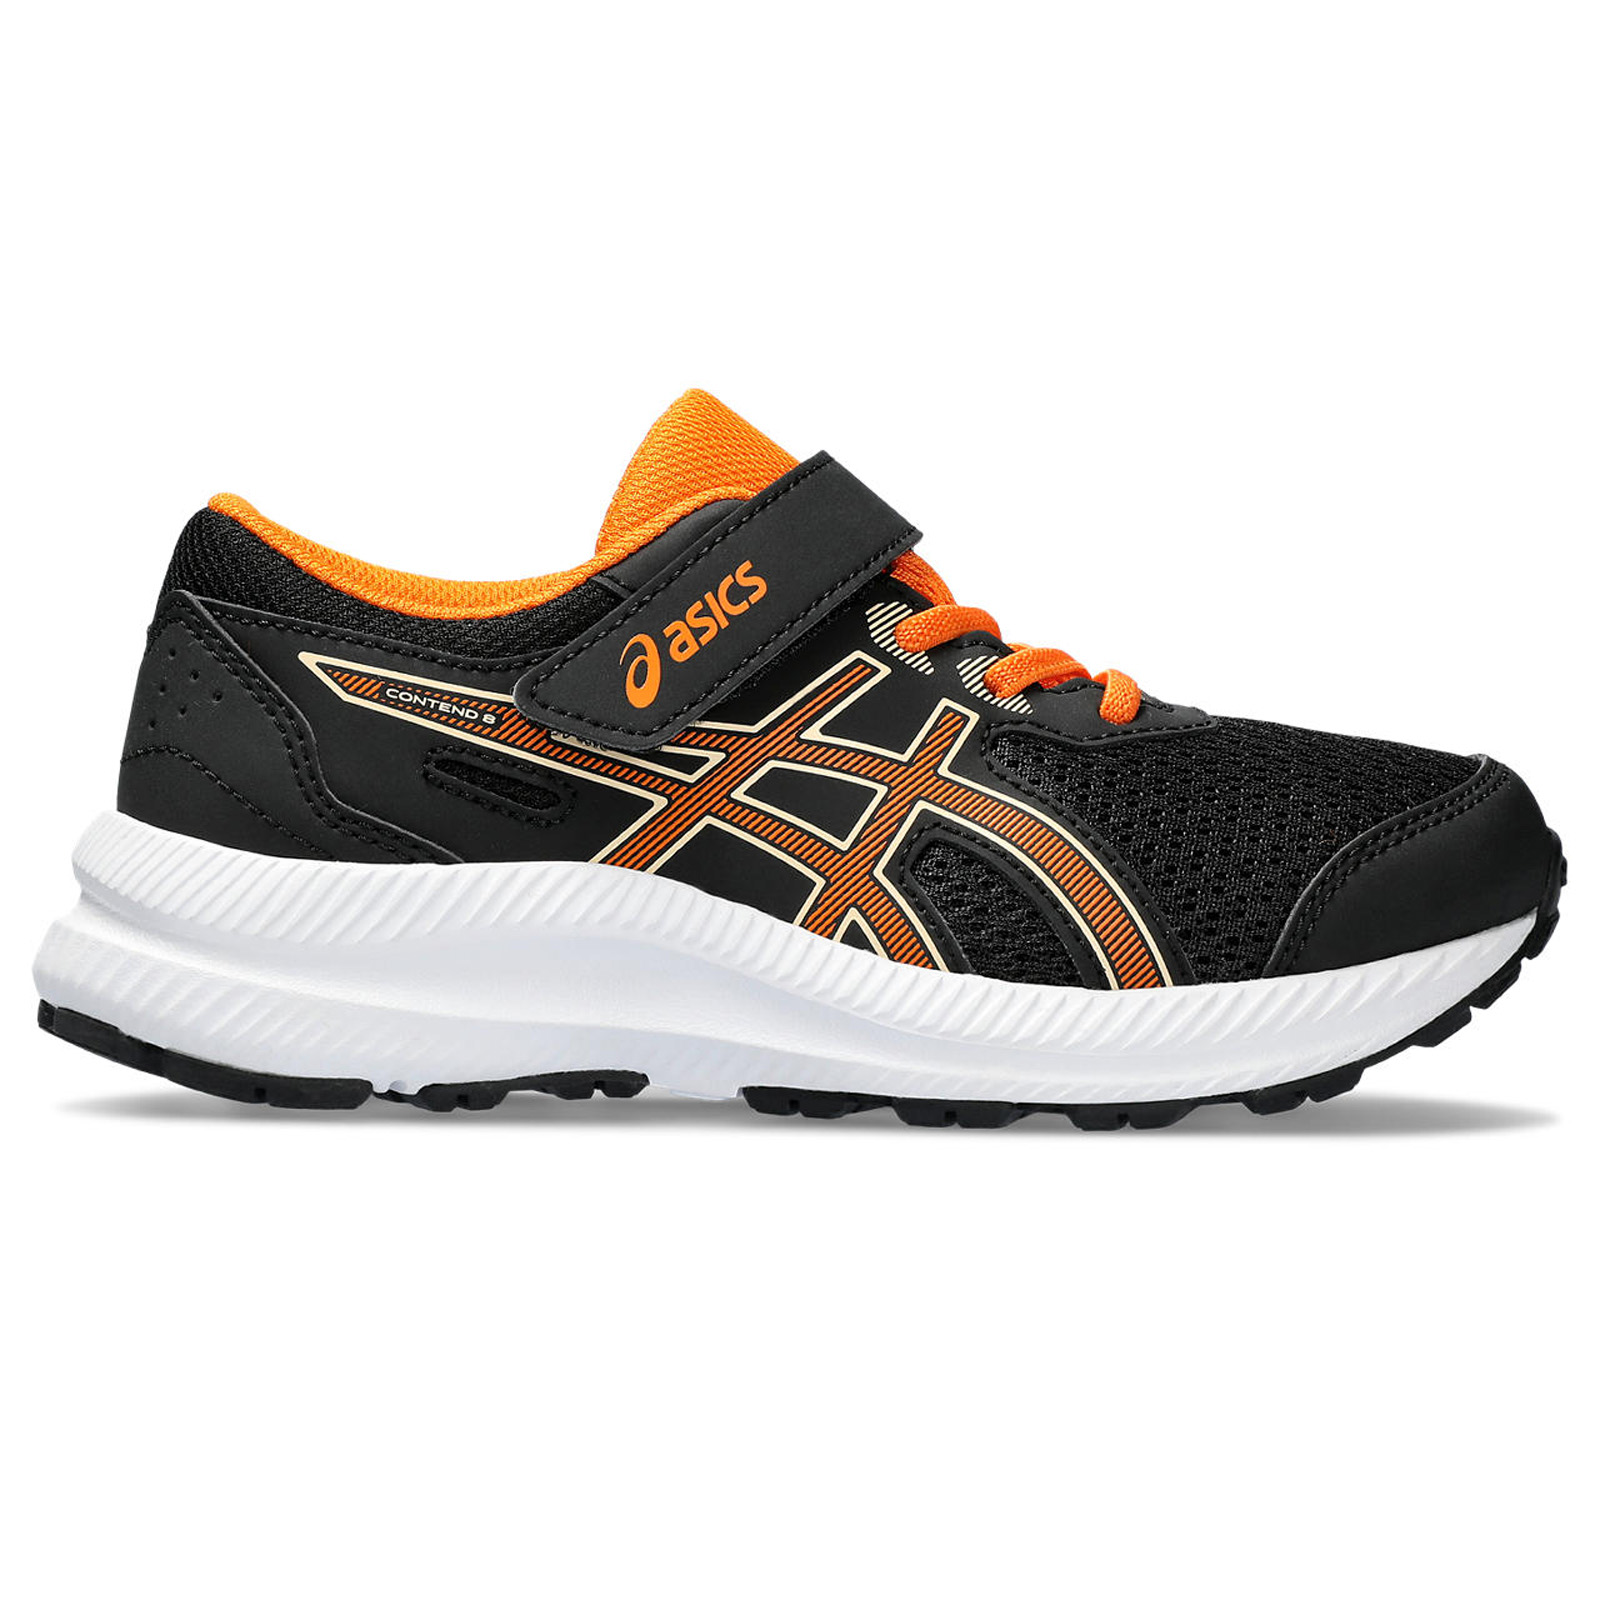 Asics - CONTEND 8 PS - 007-ΜΑΥ/ΠΟΡ Παιδικά > Παπούτσια > Αθλητικά > Παπούτσι Low Cut